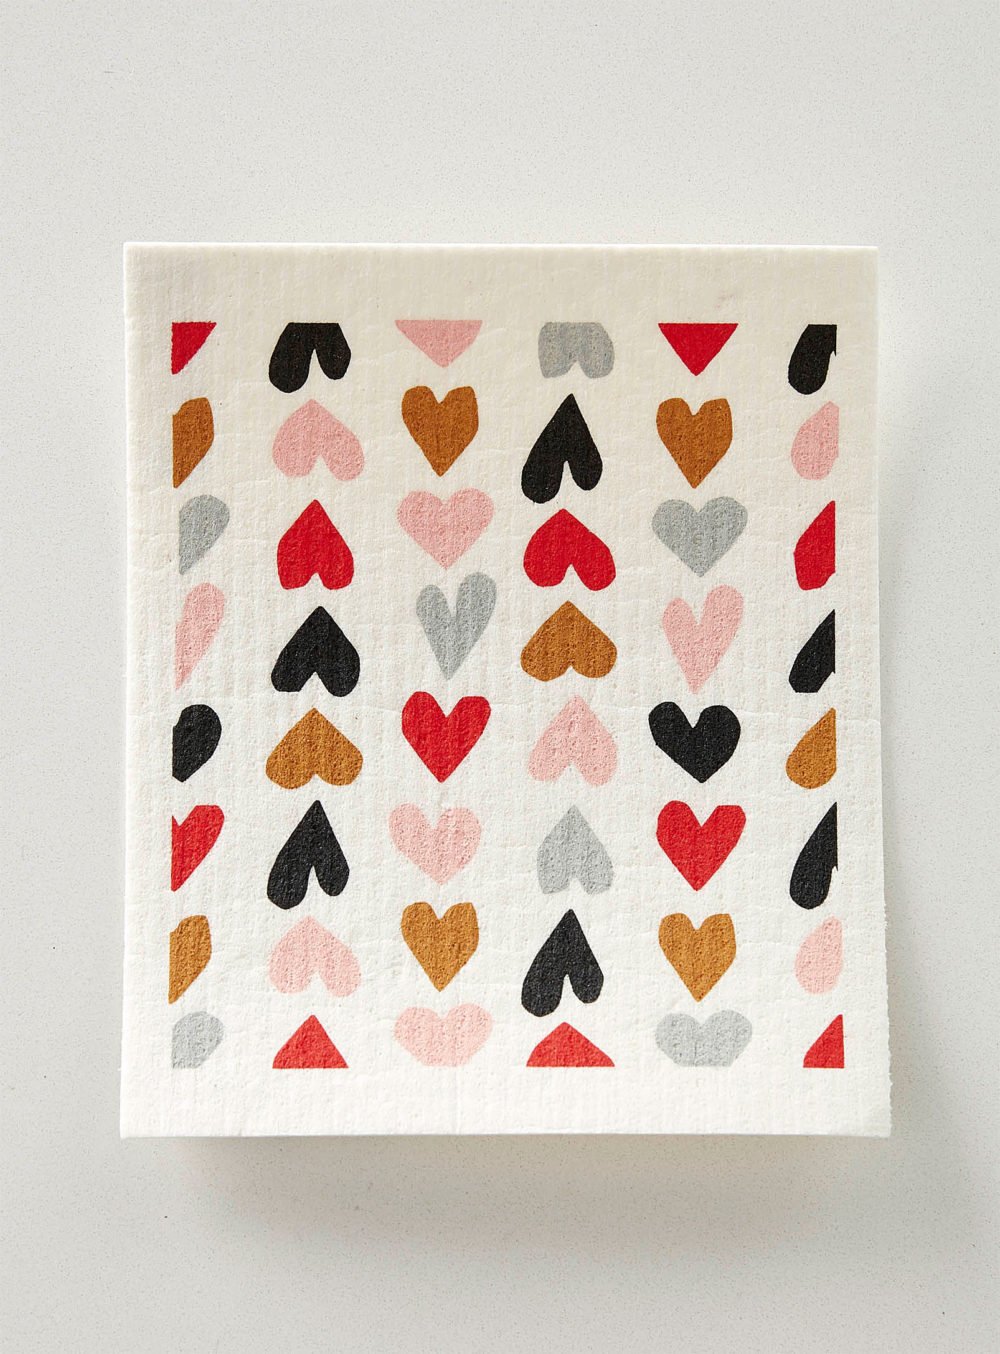 Universal love sponge cloth from Simons for a piece on alternatives to paper towels during a shortage